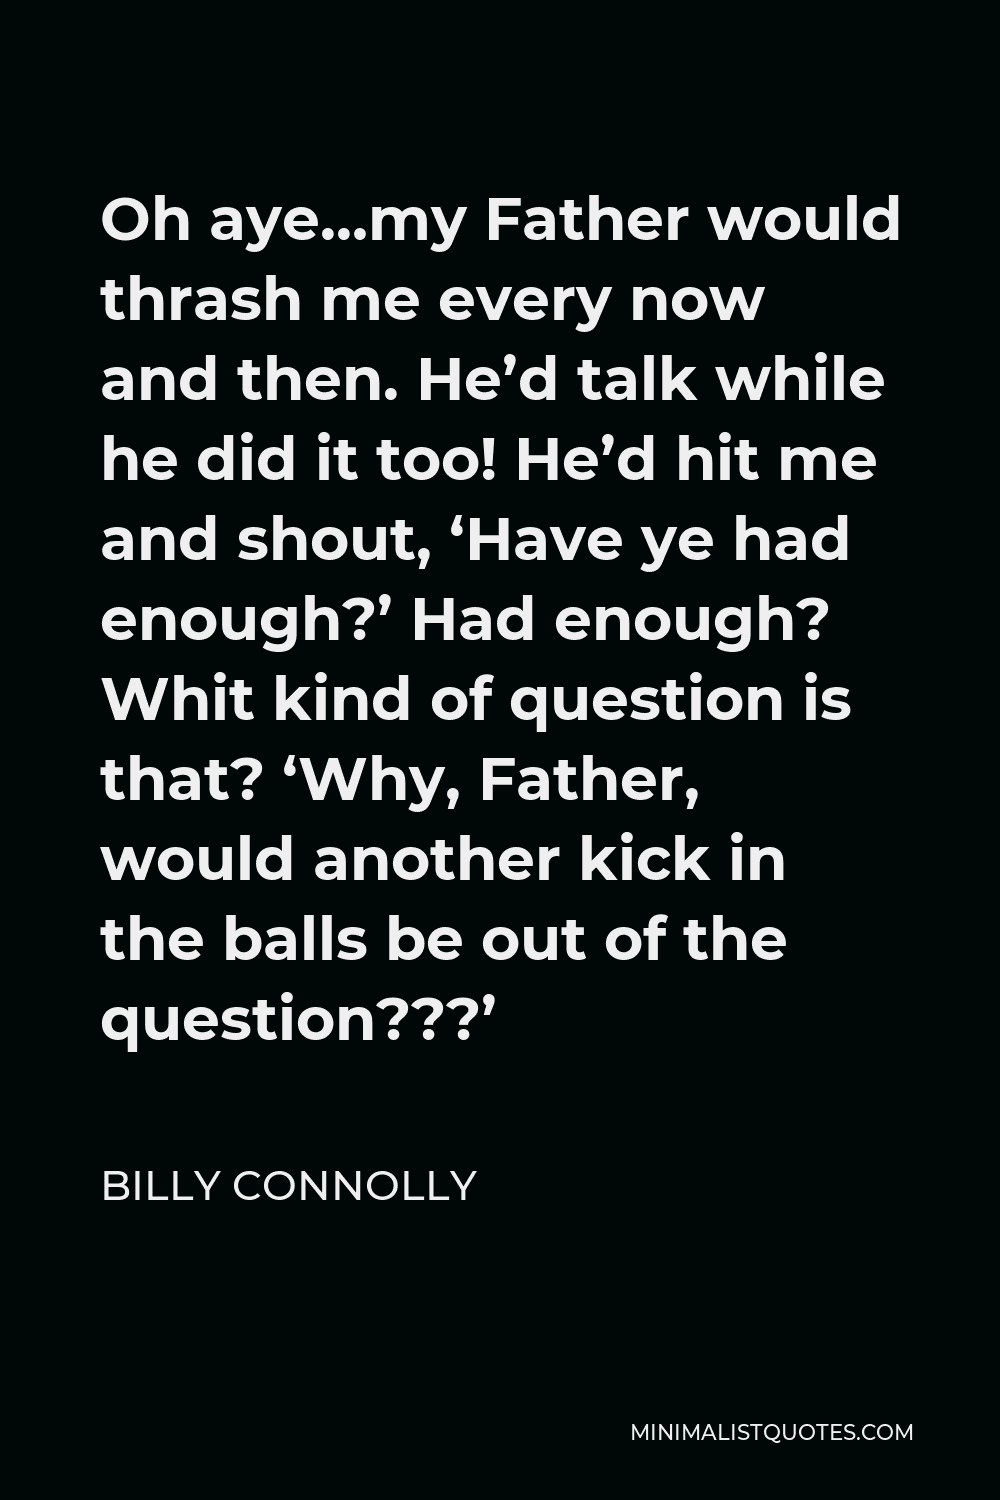 Billy Connolly Quote - Oh aye…my Father would thrash me every now and then. He’d talk while he did it too! He’d hit me and shout, ‘Have ye had enough?’ Had enough? Whit kind of question is that? ‘Why, Father, would another kick in the balls be out of the question???’